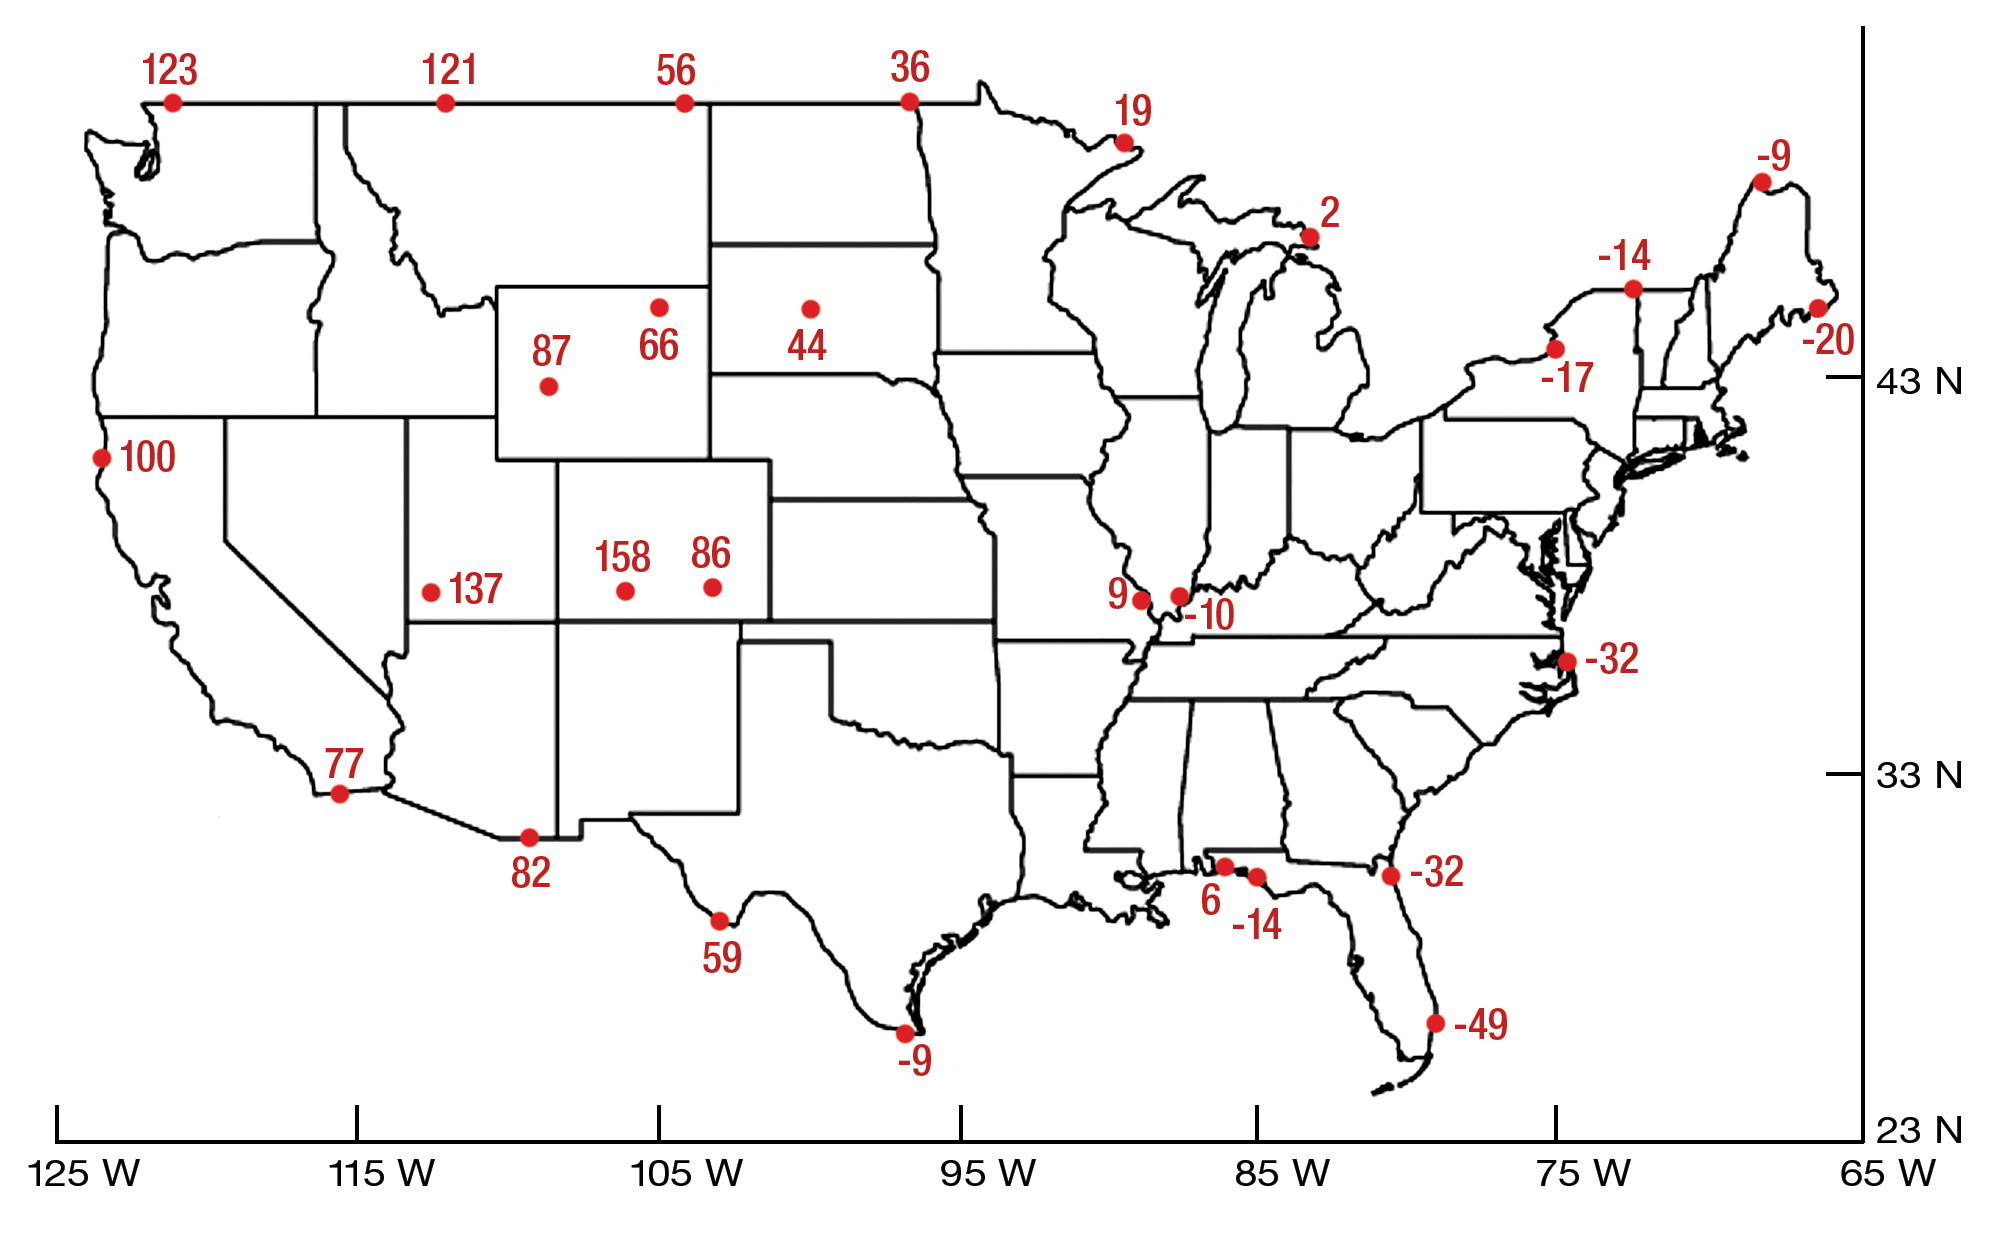 map of U.S. showing NAVD 88 and NGVD 29 vertical datums